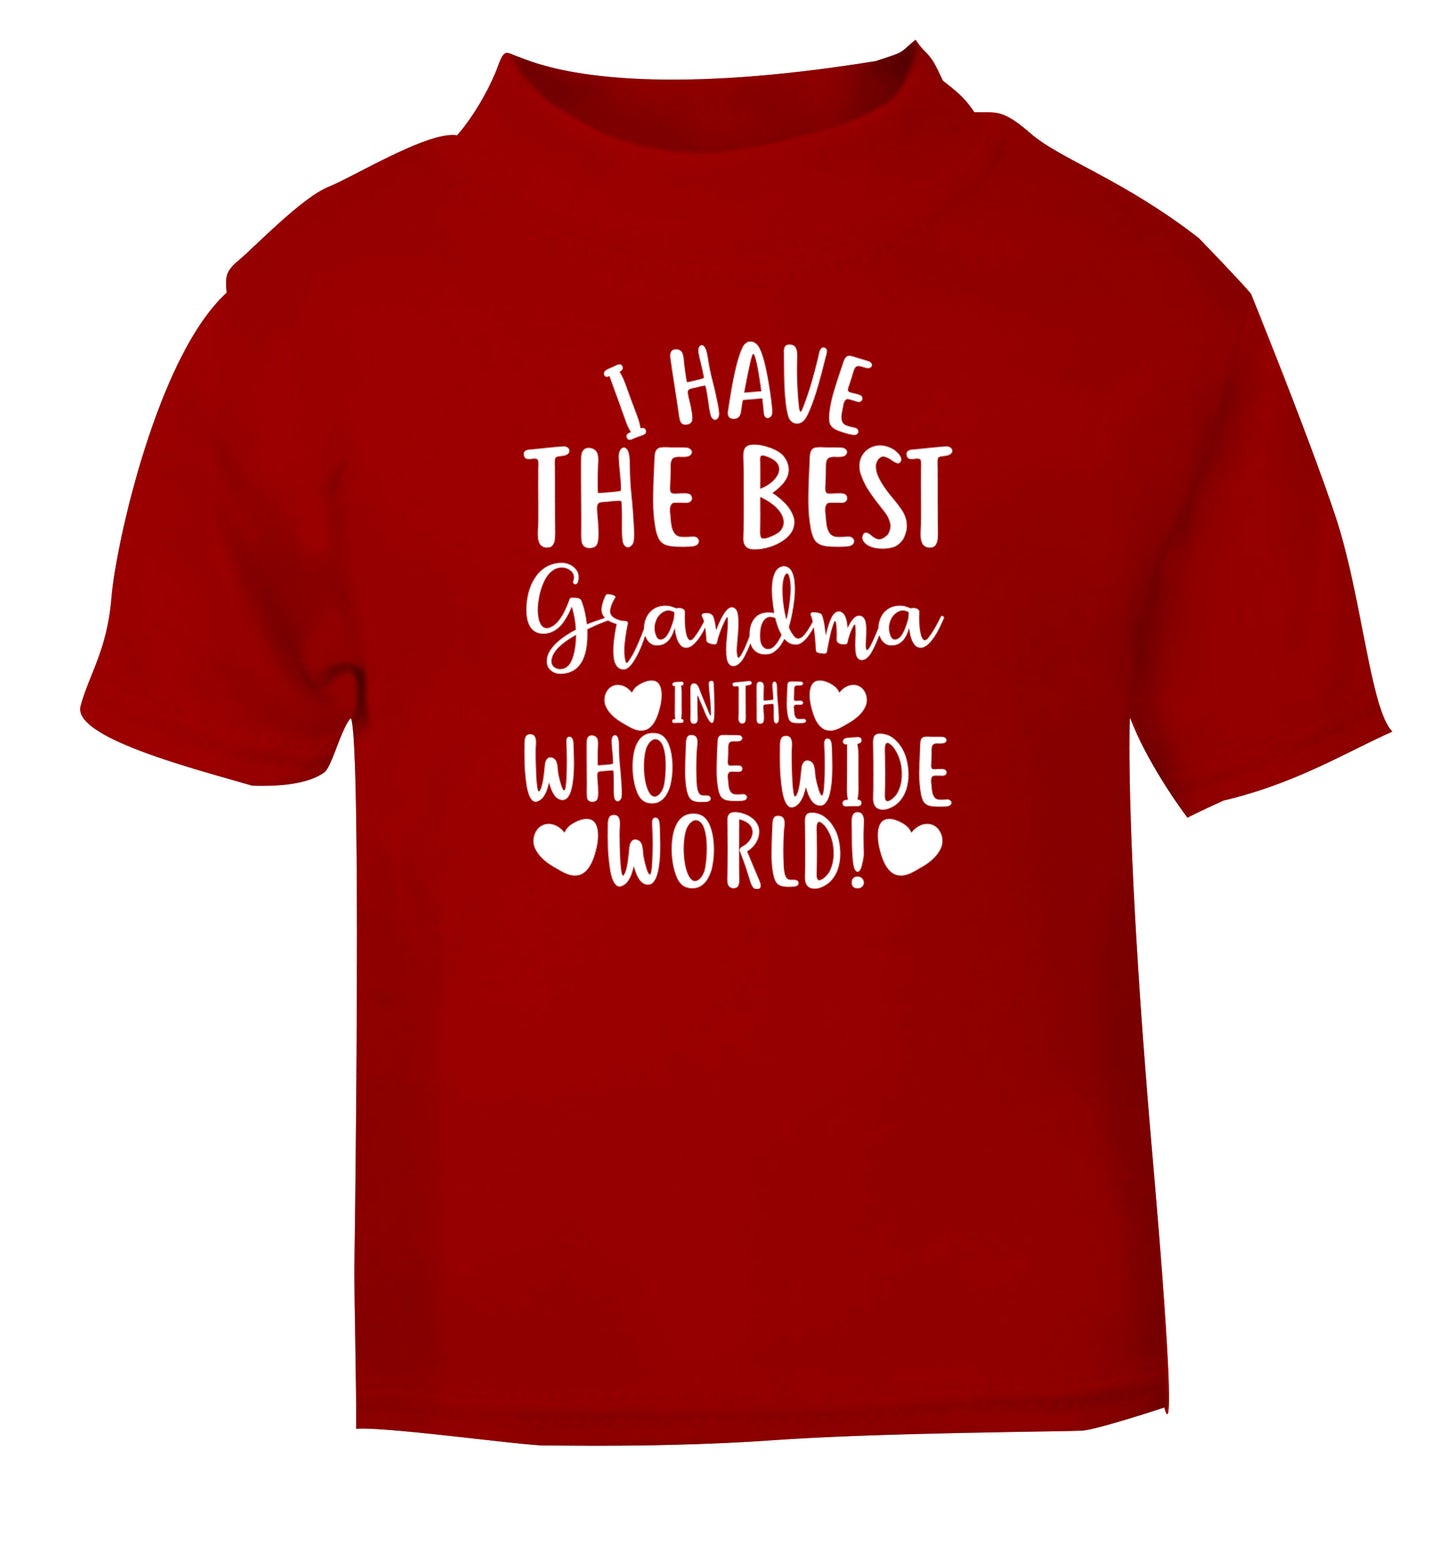 I have the best grandma in the whole wide world! red Baby Toddler Tshirt 2 Years